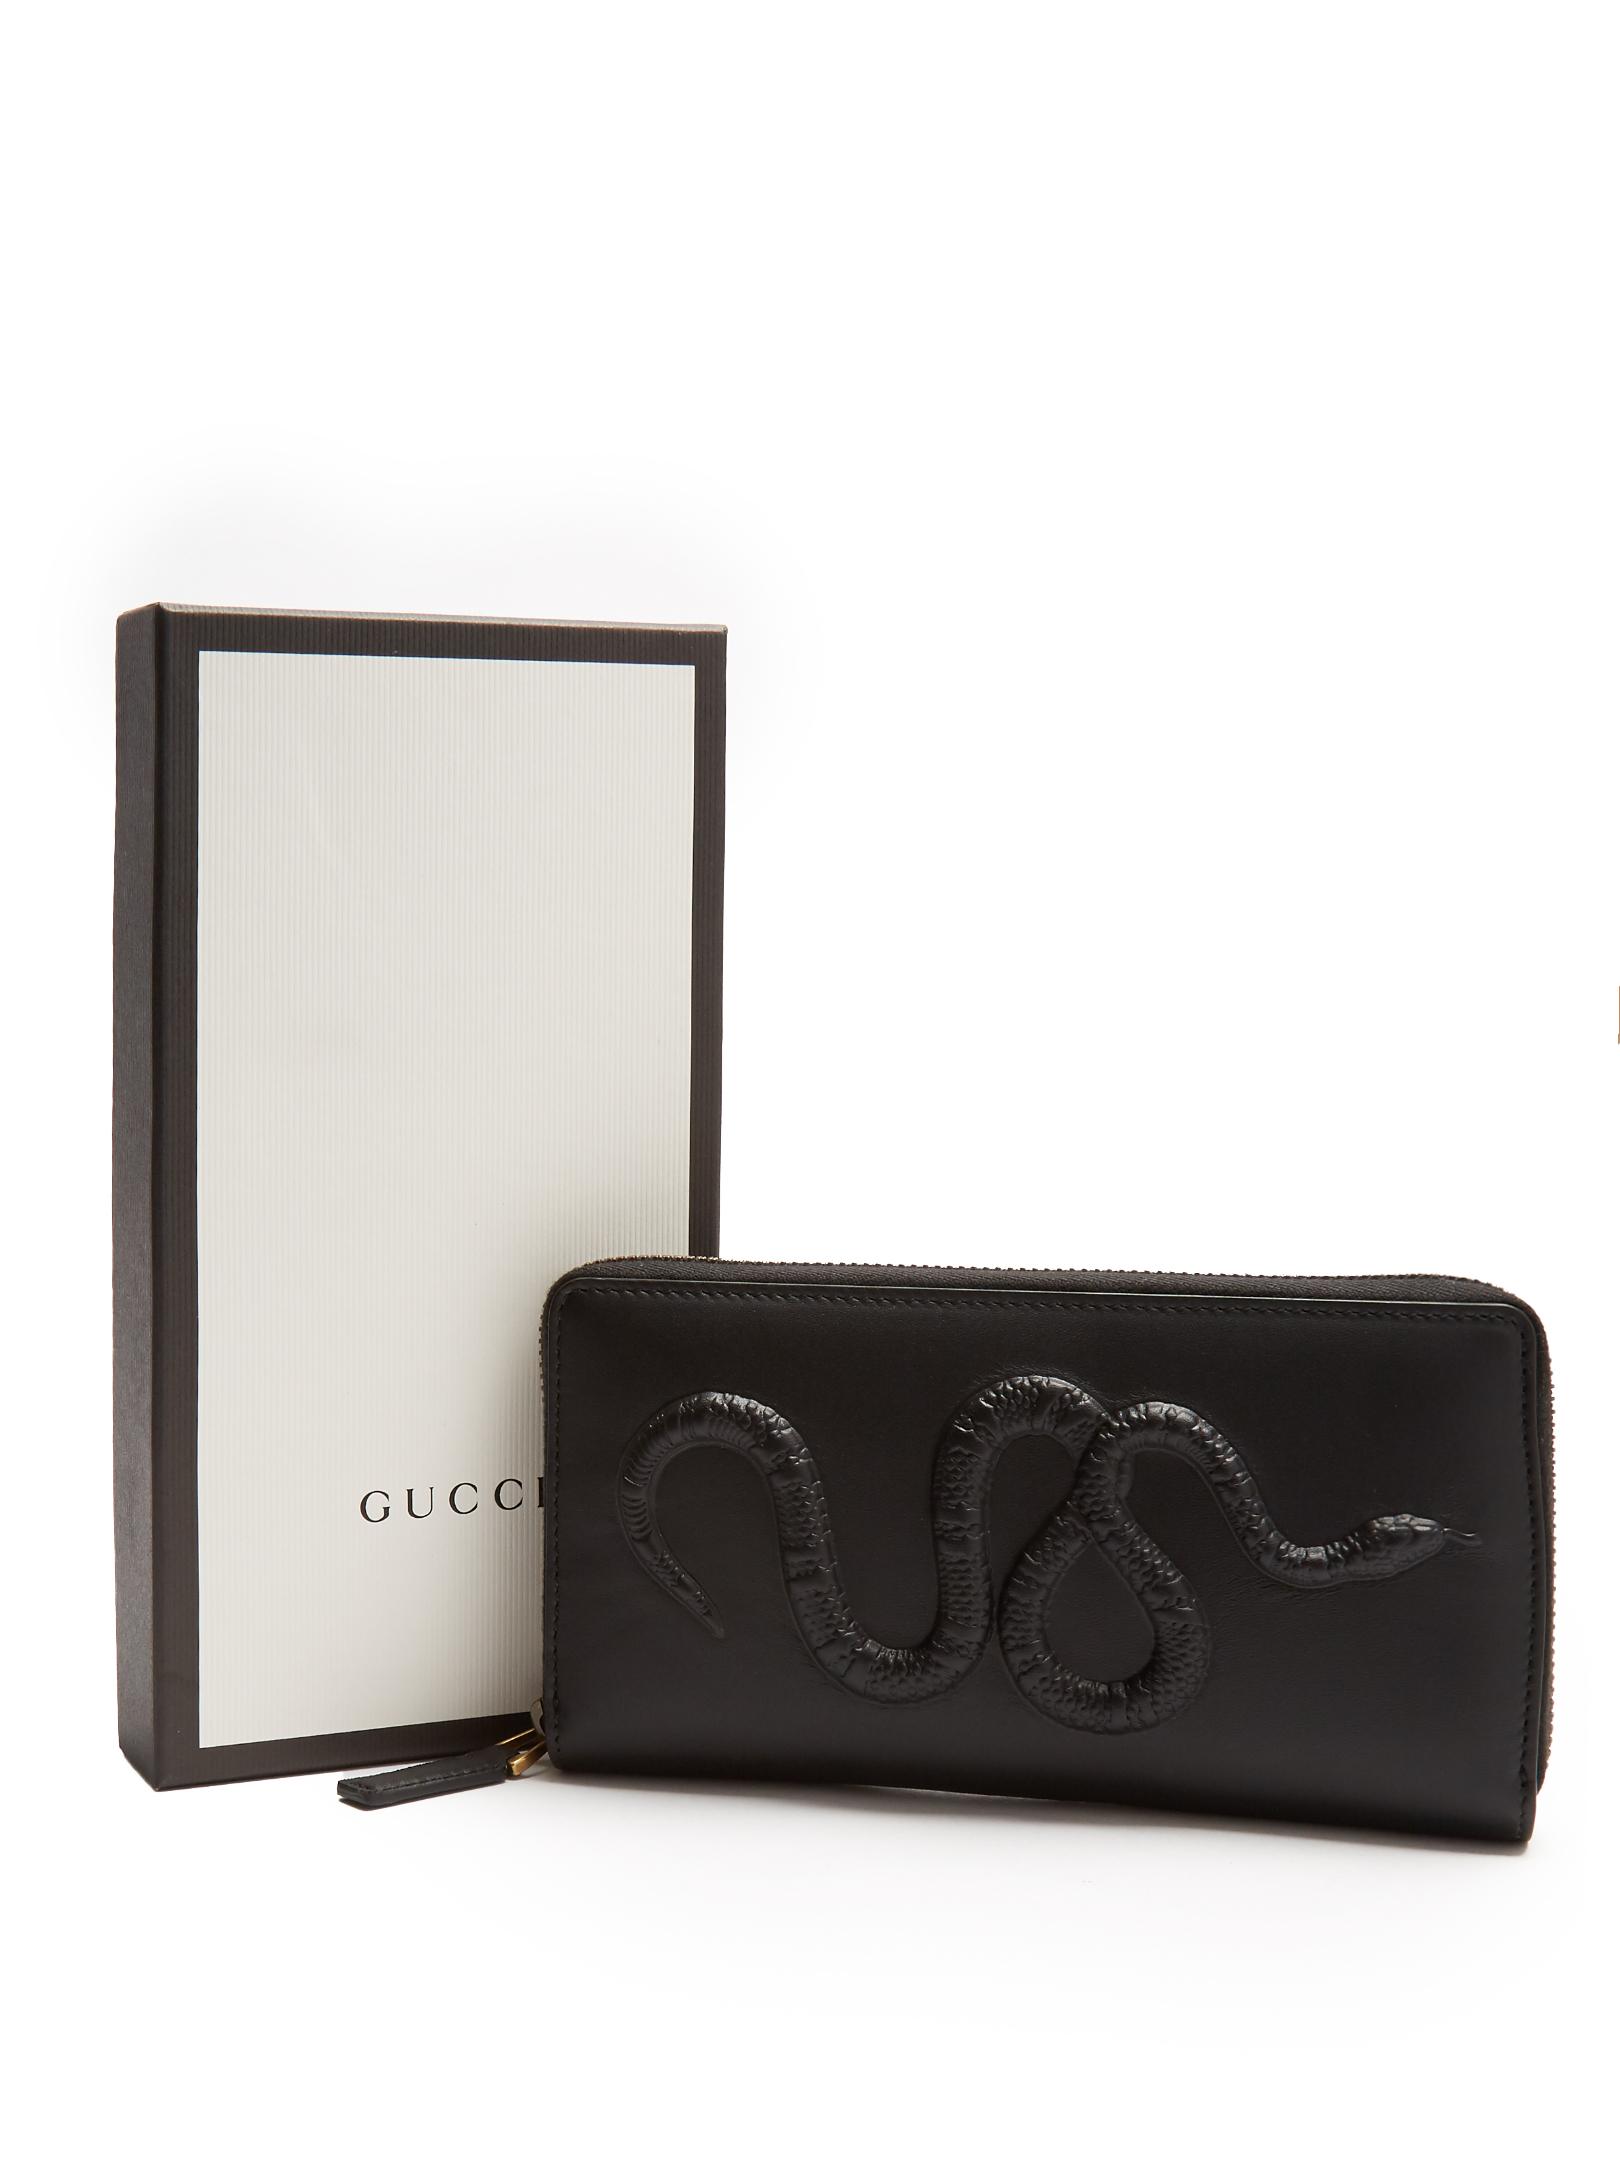 Lyst - Gucci Snake-embossed Leather Wallet in Black